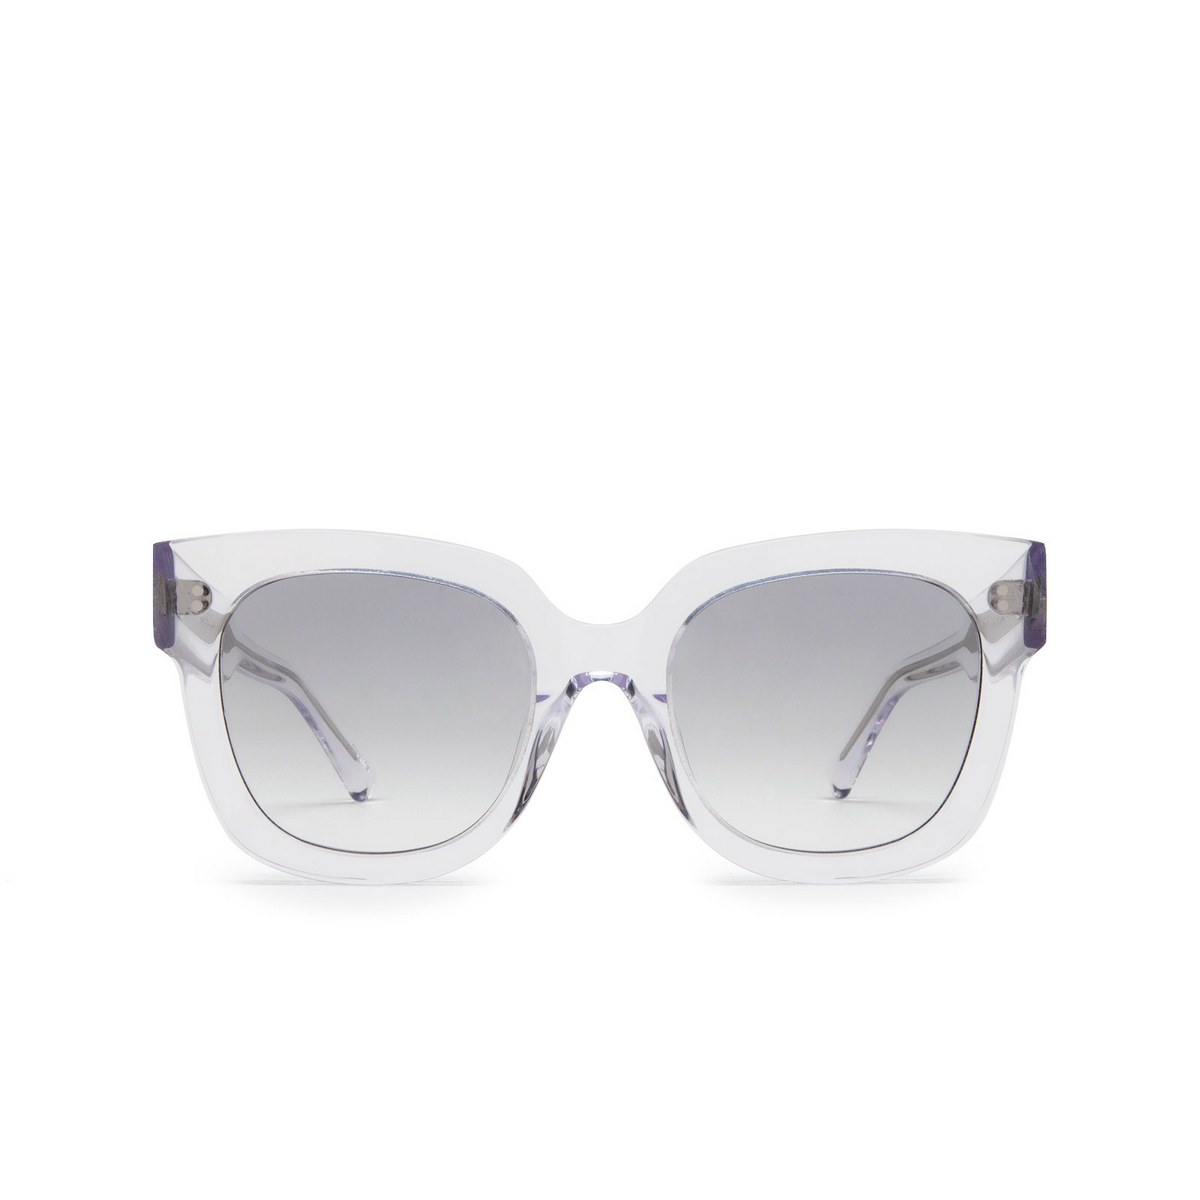 Chimi 08 Sunglasses CLEAR - front view